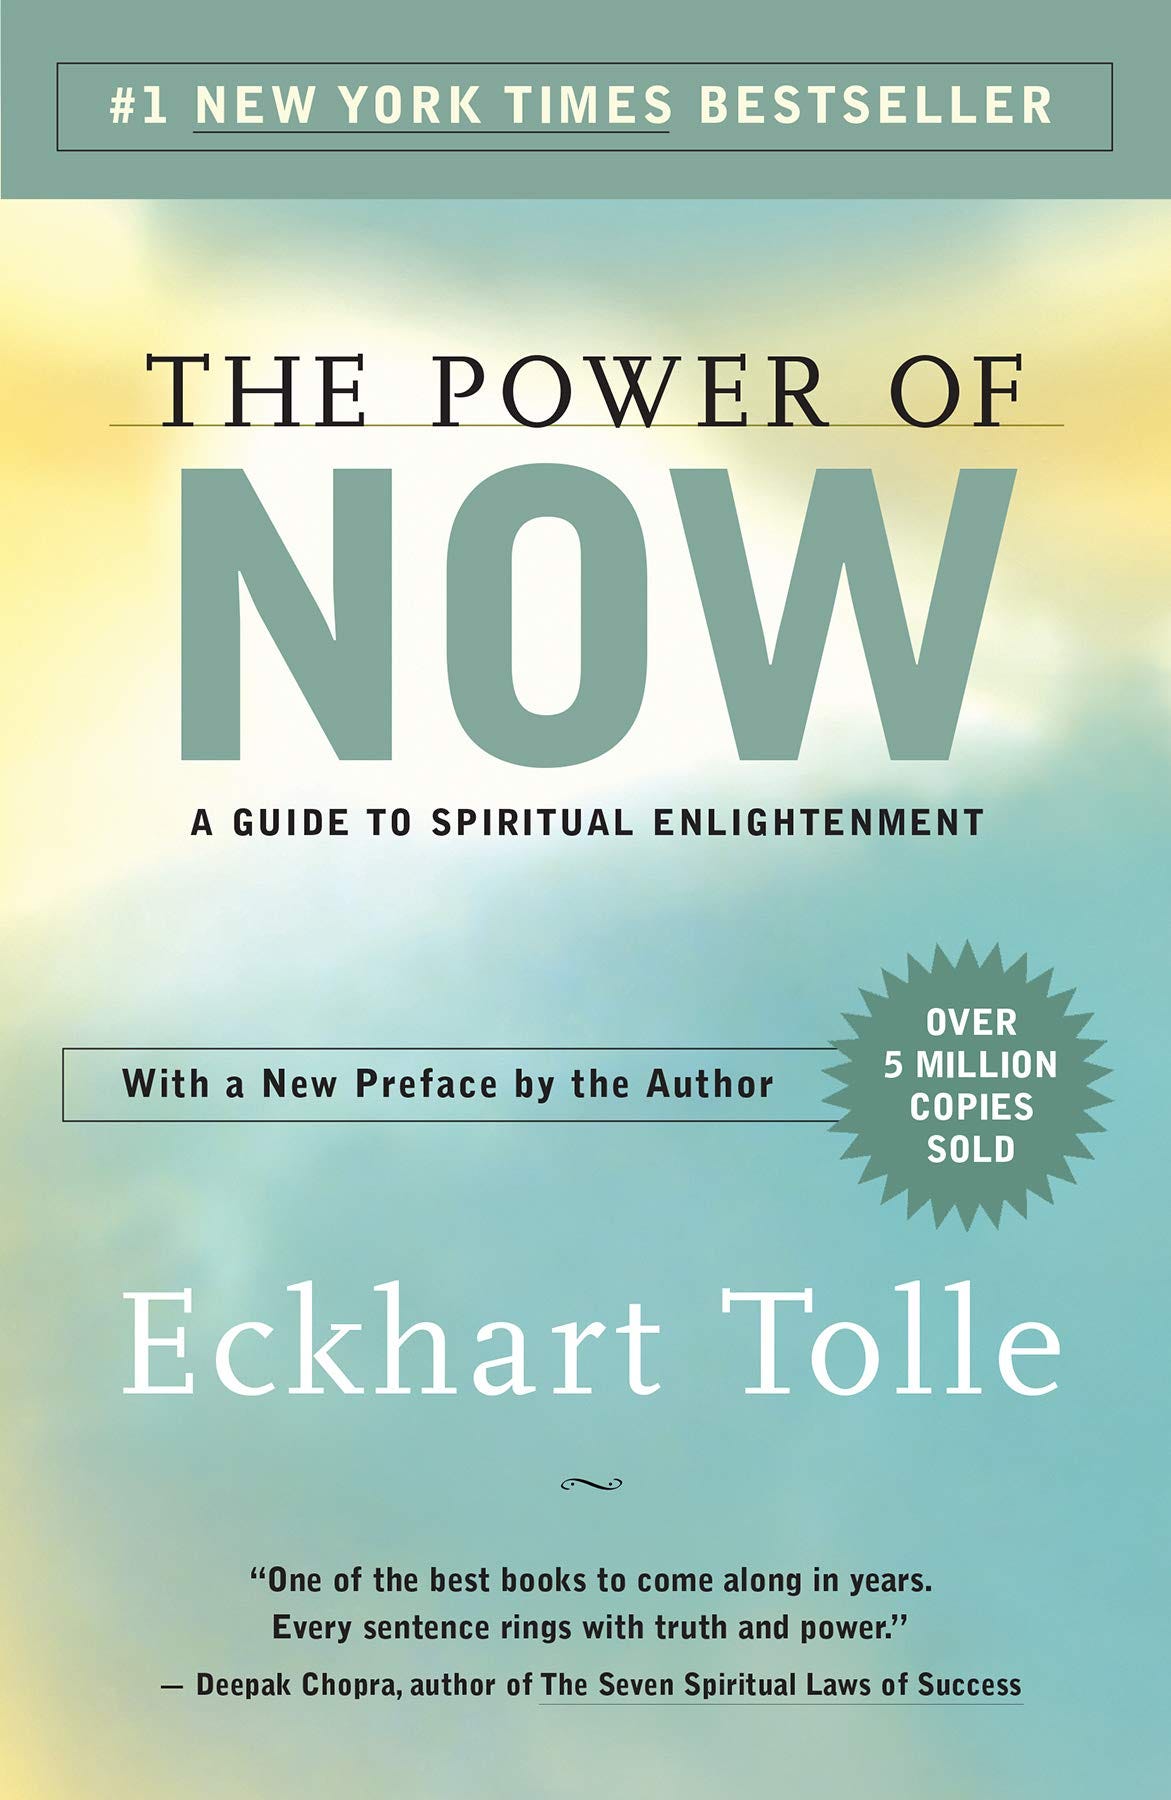 The Power of Now: A Guide to Spiritual Enlightenment : Tolle, Eckhart:  Amazon.com.mx: Libros